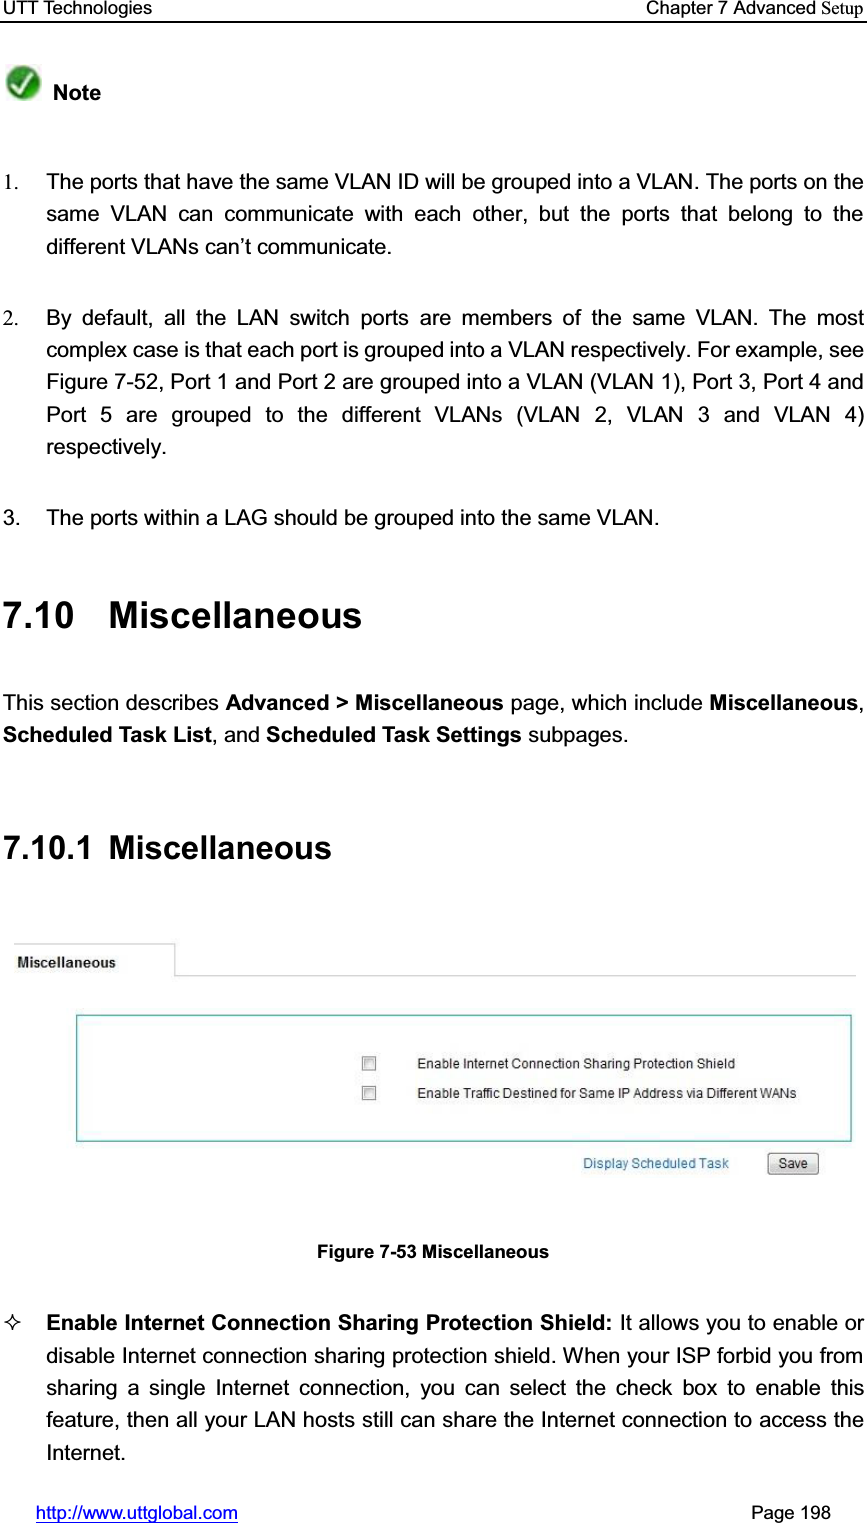 UTT Technologies    Chapter 7 Advanced Setuphttp://www.uttglobal.com                                                       Page 198 Note1.  The ports that have the same VLAN ID will be grouped into a VLAN. The ports on the same VLAN can communicate with each other, but the ports that belong to the different VLANVFDQ¶t communicate. 2.  By default, all the LAN switch ports are members of the same VLAN. The most complex case is that each port is grouped into a VLAN respectively. For example, see Figure 7-52, Port 1 and Port 2 are grouped into a VLAN (VLAN 1), Port 3, Port 4 and Port 5 are grouped to the different VLANs (VLAN 2, VLAN 3 and VLAN 4) respectively.  3.  The ports within a LAG should be grouped into the same VLAN. 7.10 Miscellaneous This section describes Advanced &gt; Miscellaneous page, which include Miscellaneous,Scheduled Task List, and Scheduled Task Settings subpages. 7.10.1 Miscellaneous Figure 7-53 Miscellaneous Enable Internet Connection Sharing Protection Shield: It allows you to enable or disable Internet connection sharing protection shield. When your ISP forbid you from sharing a single Internet connection, you can select the check box to enable this feature, then all your LAN hosts still can share the Internet connection to access the Internet. 